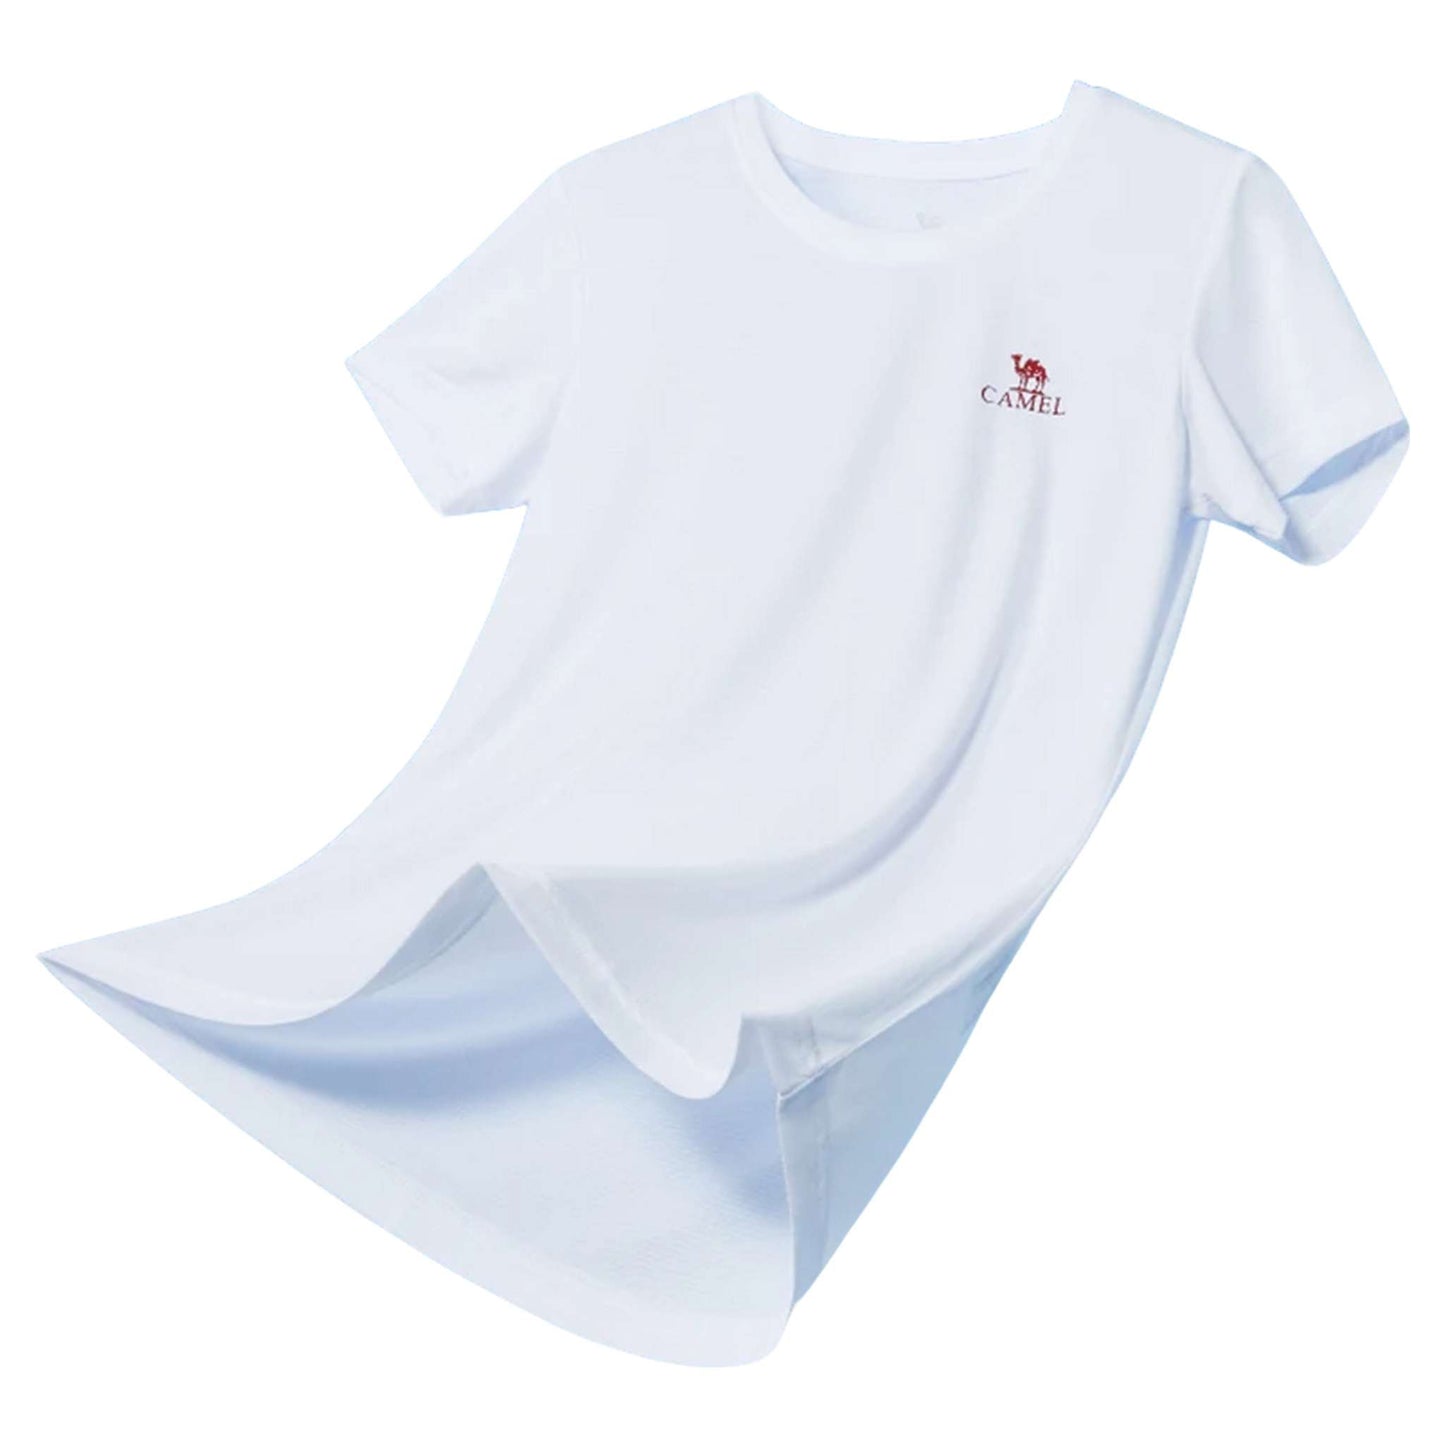 Women's Quick-Dry Outdoor Tee - Breathable, Lightweight Hiking & Running Top